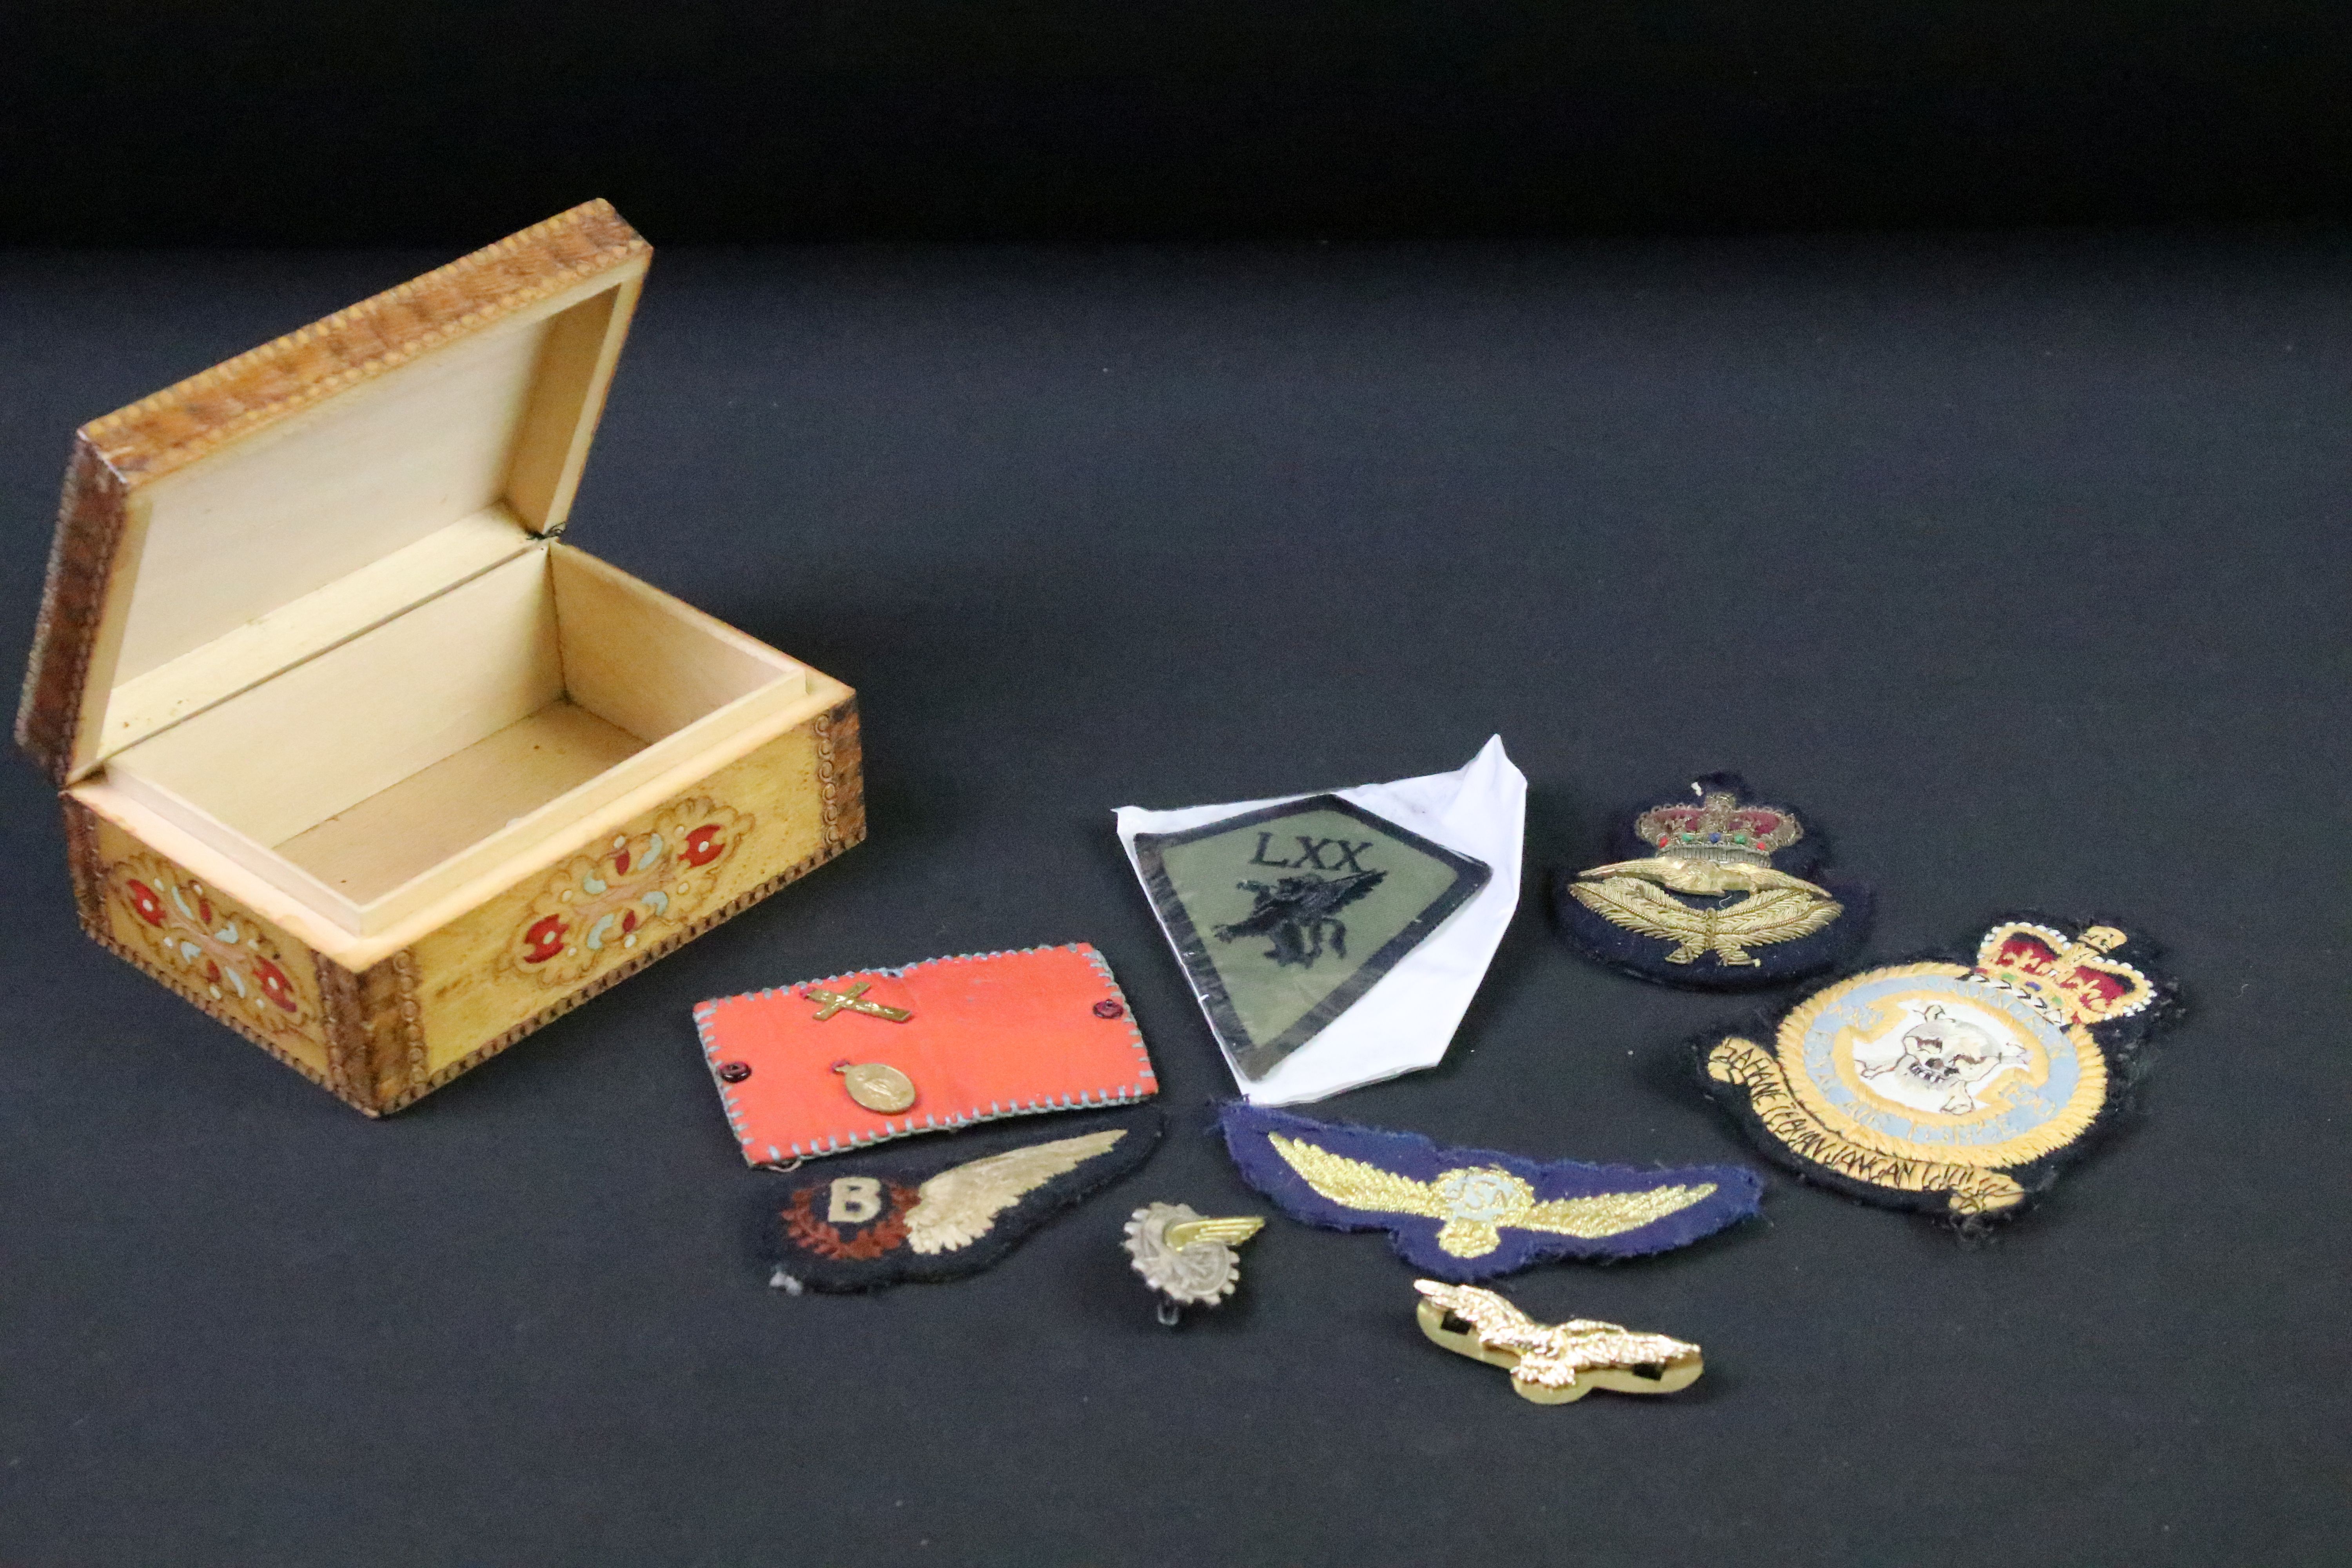 A collection of mainly British Royal Air Force cloth badges to include a bomber brevet.